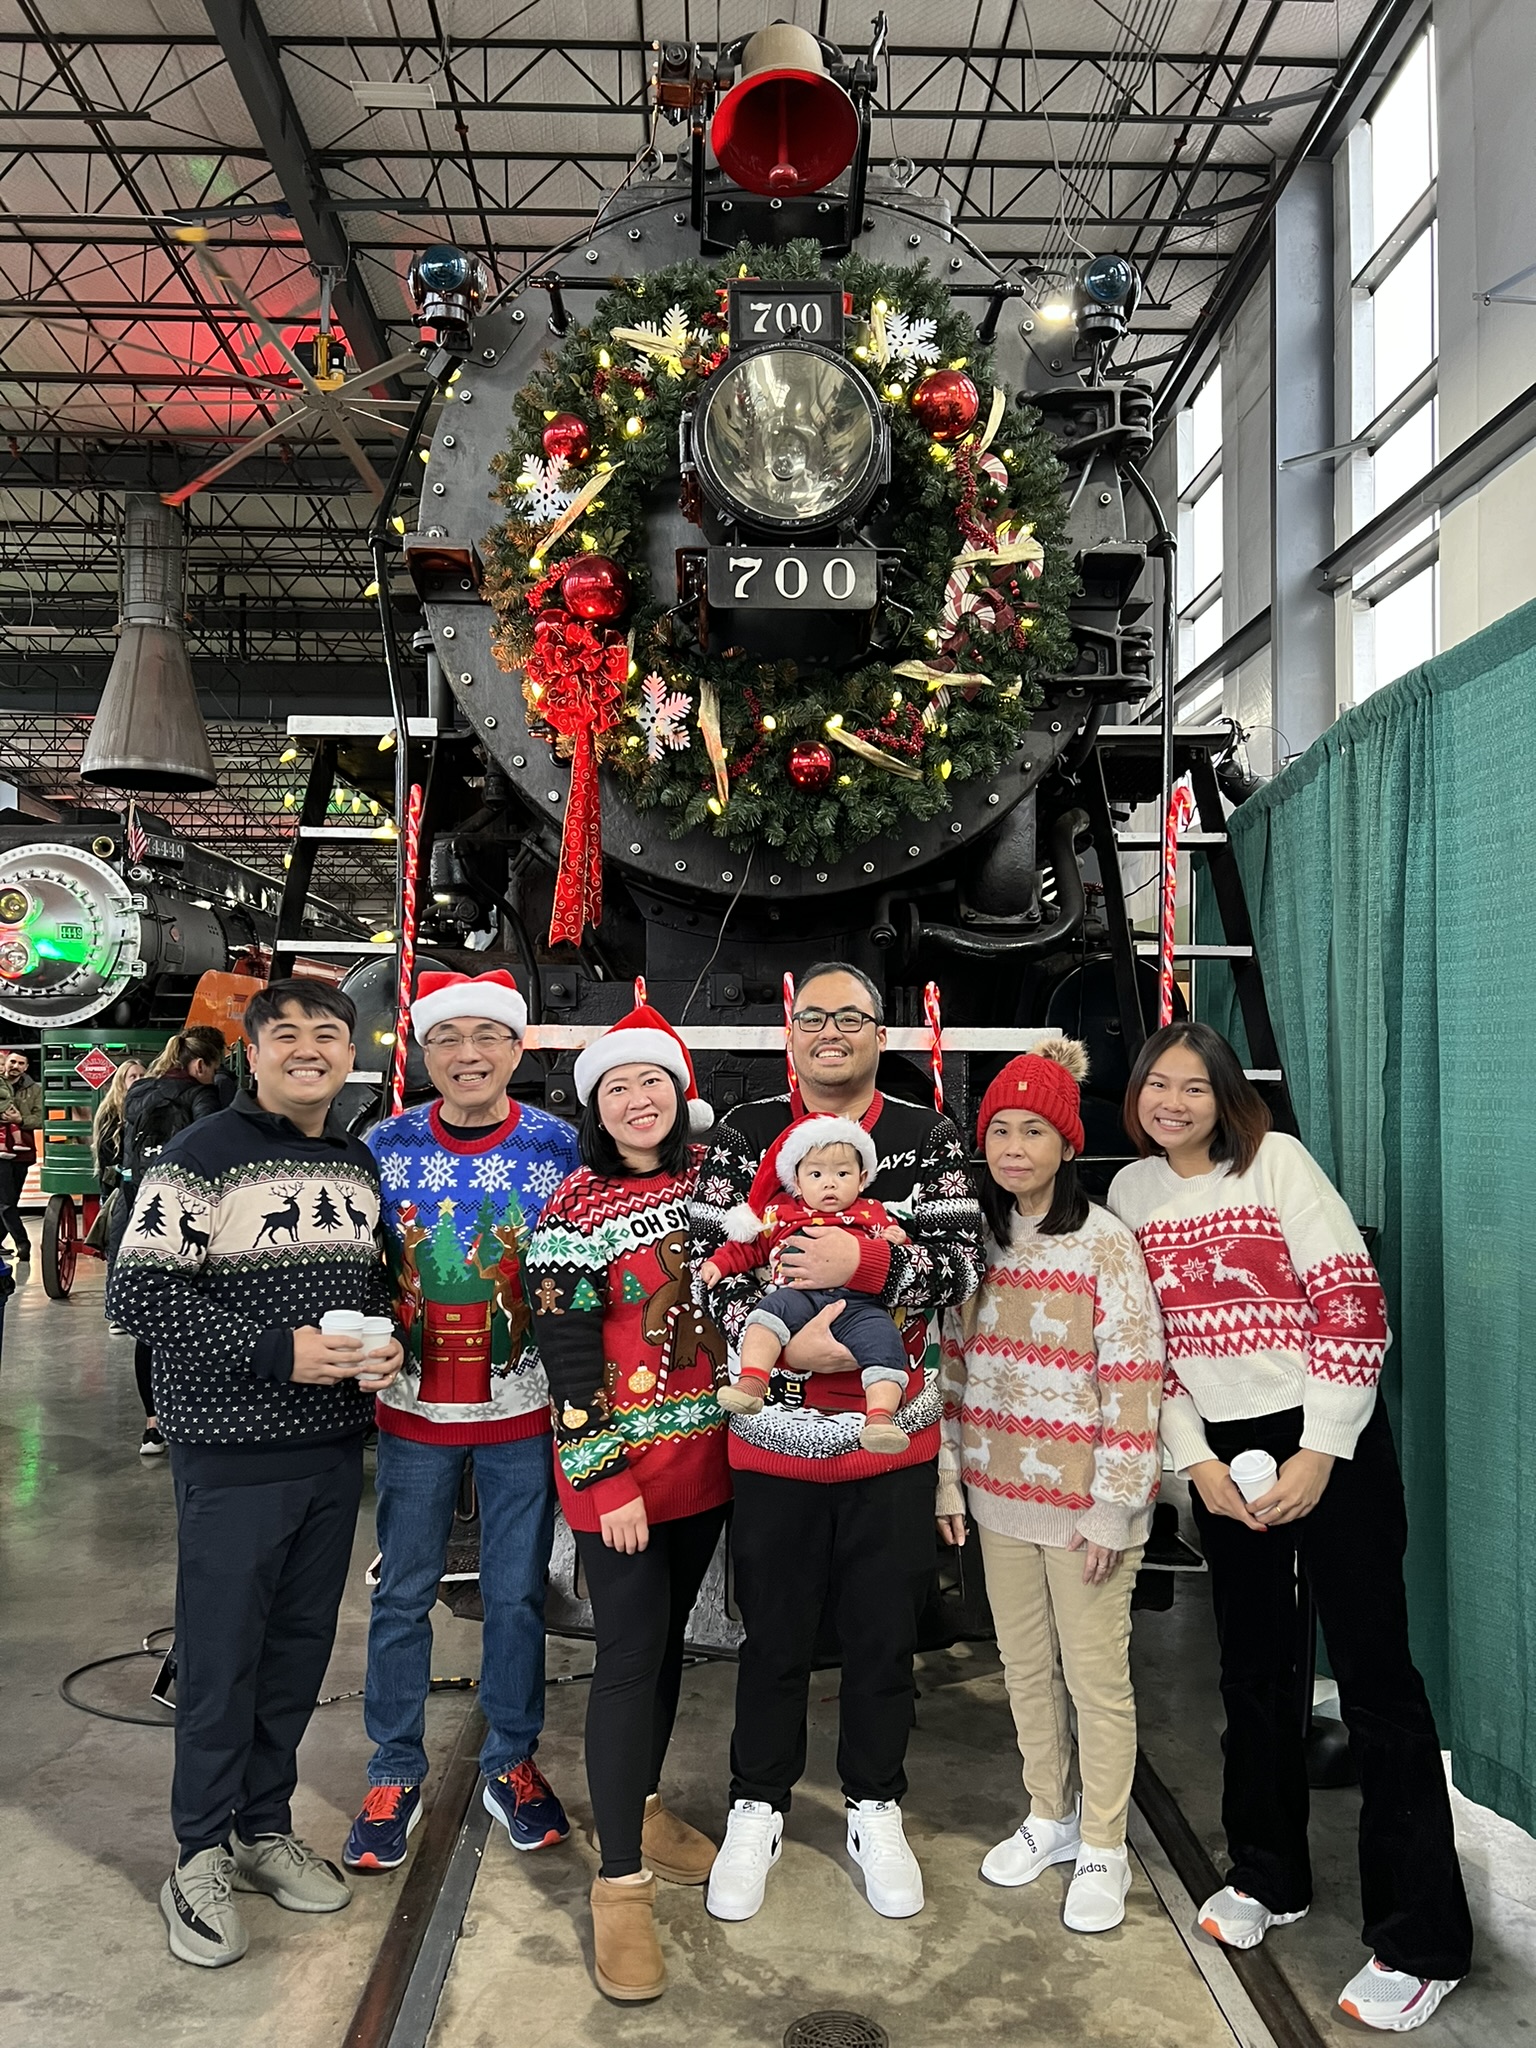 A family wearing Christmas sweaters posing in front of a steam locomotive decorated for the holidays.